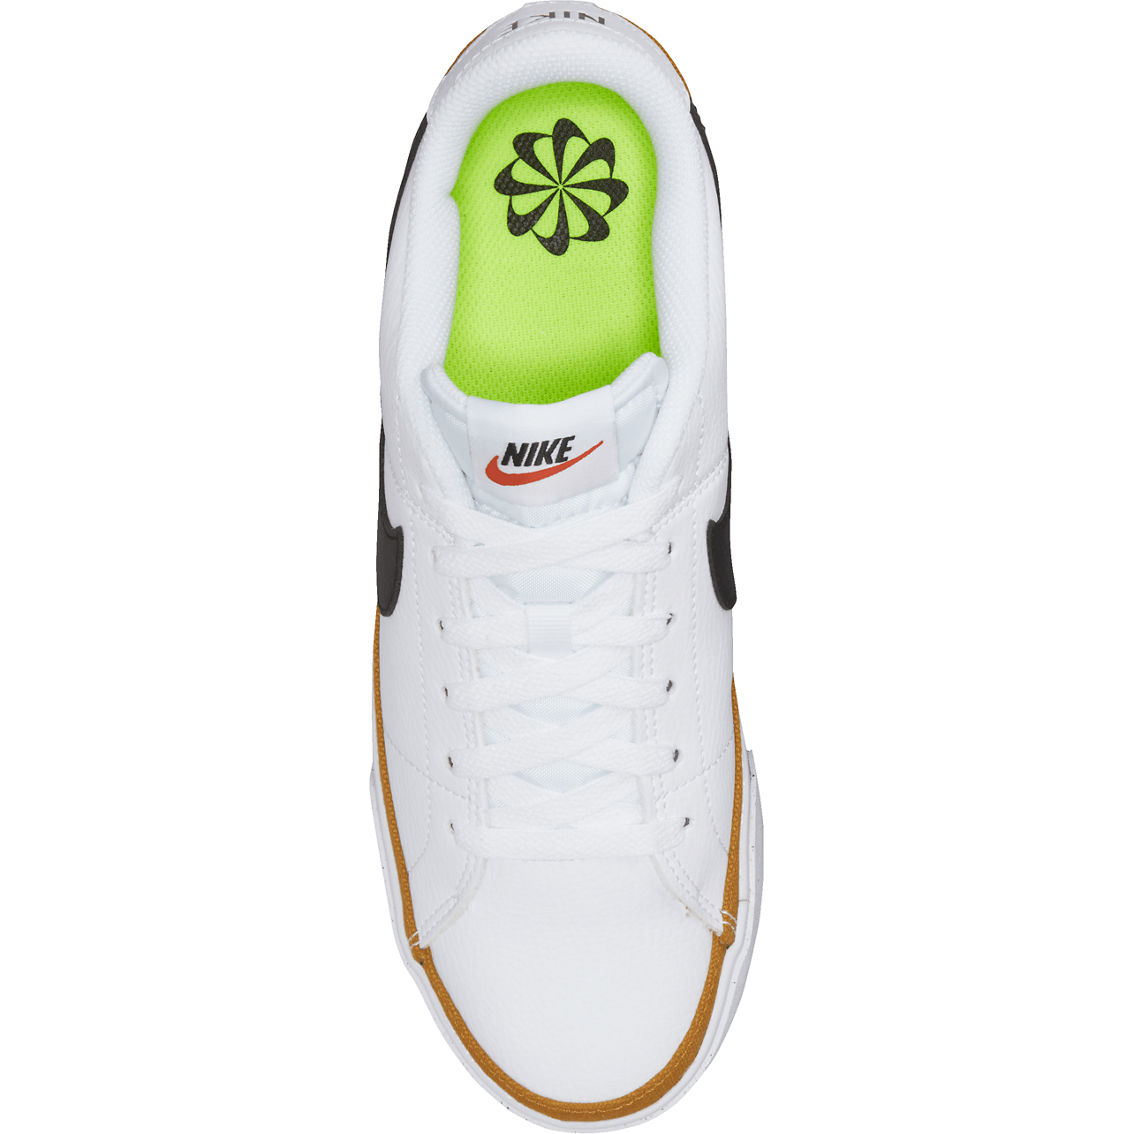 Nike Women's Court Legacy Tennis Shoes - Image 3 of 8